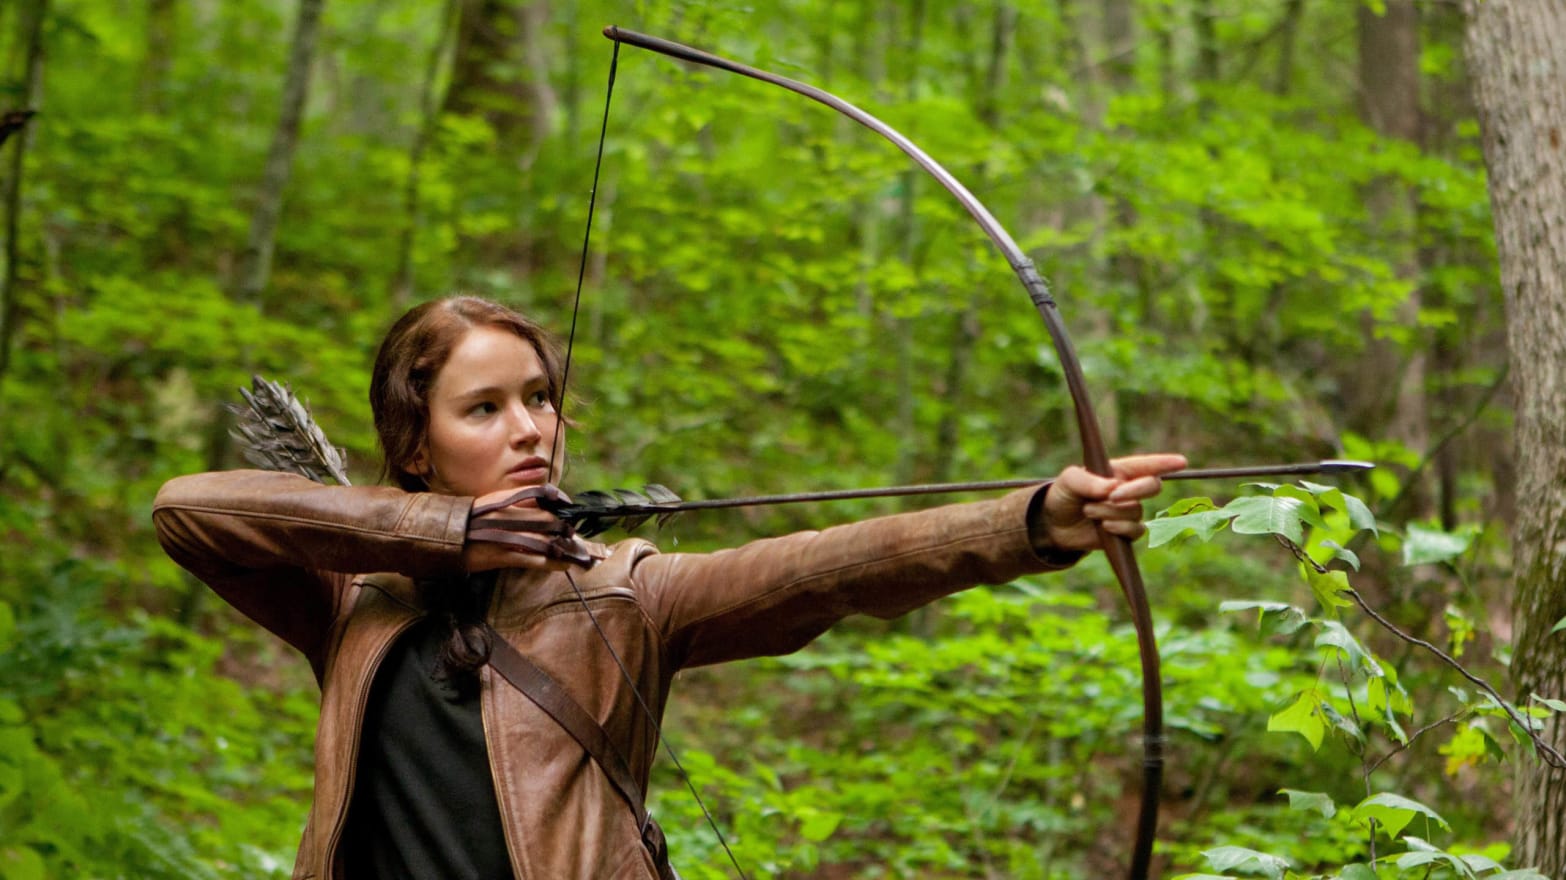 Catching Fire': How Jennifer Lawrence Learned to Shoot a Bow and Arrow